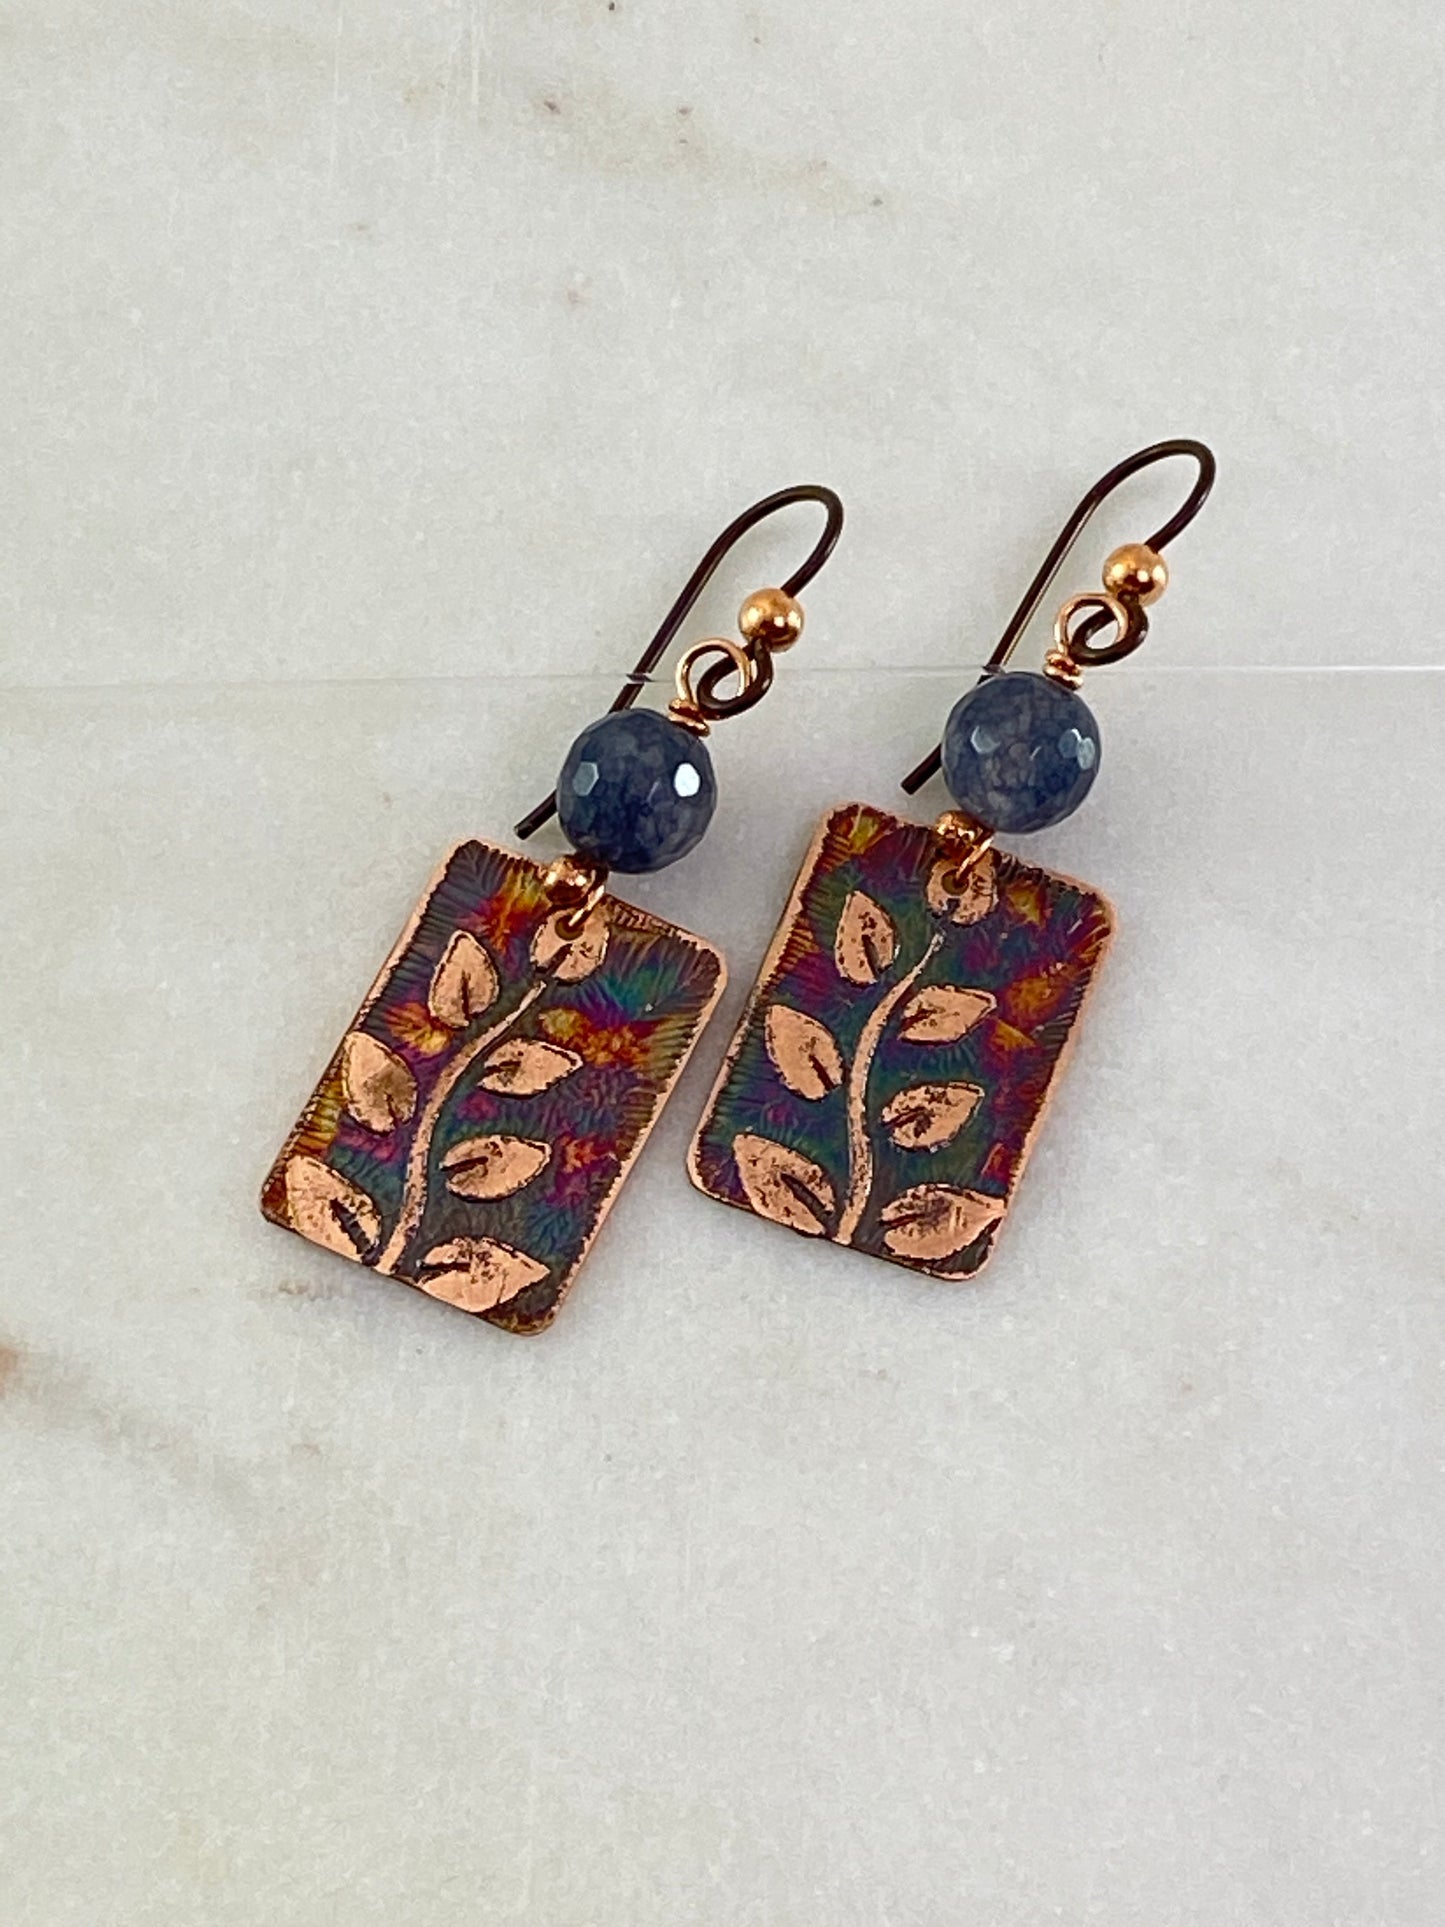 Acid etched copper leaf earrings with agate gemstone